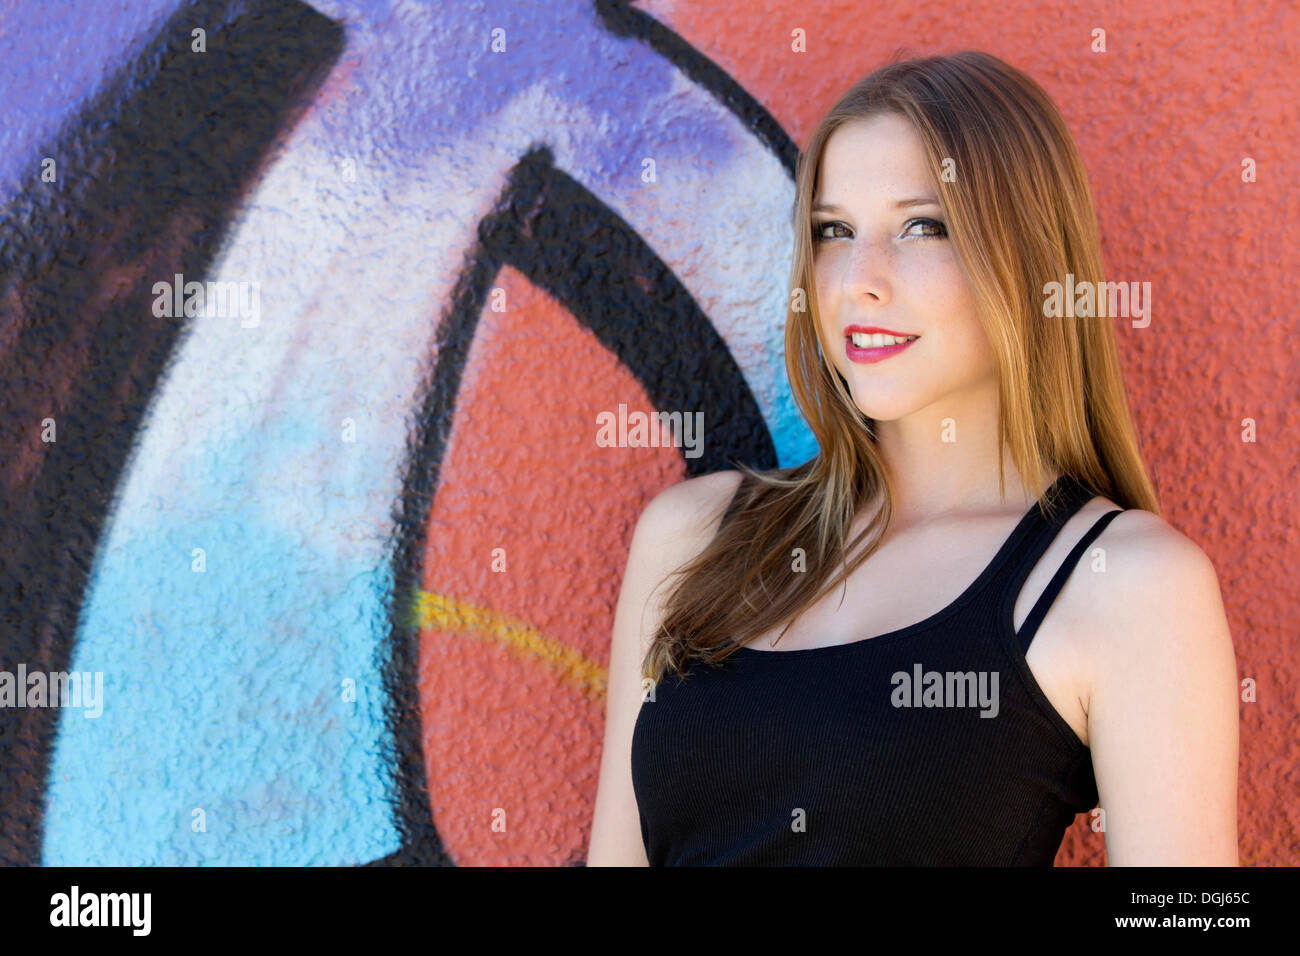 Young woman in a black top posing in front of a graffiti wall, portrait Stock Photo